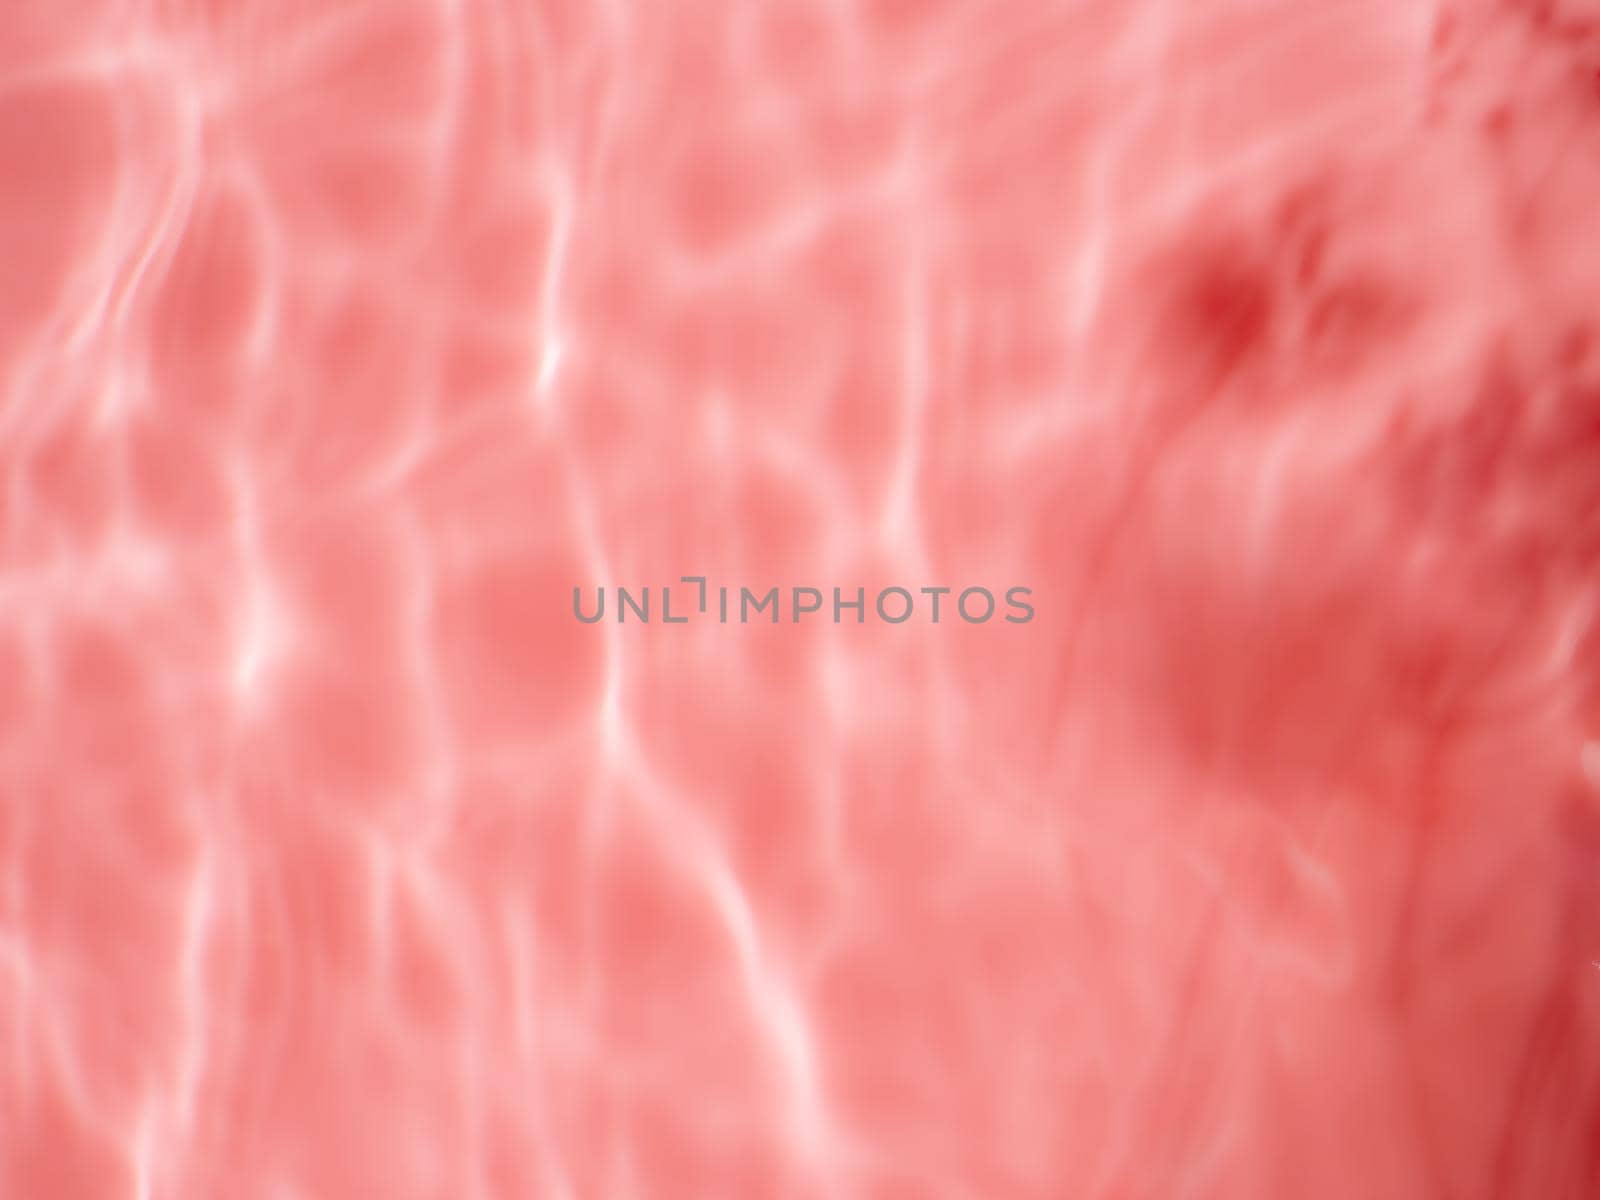 Ripple water texture on pink background with foliage shadows. Shadow of water on sunlight. Mockup for product, spa or cosmetic background. Marble pink water surface with plant shadows as wallpaper